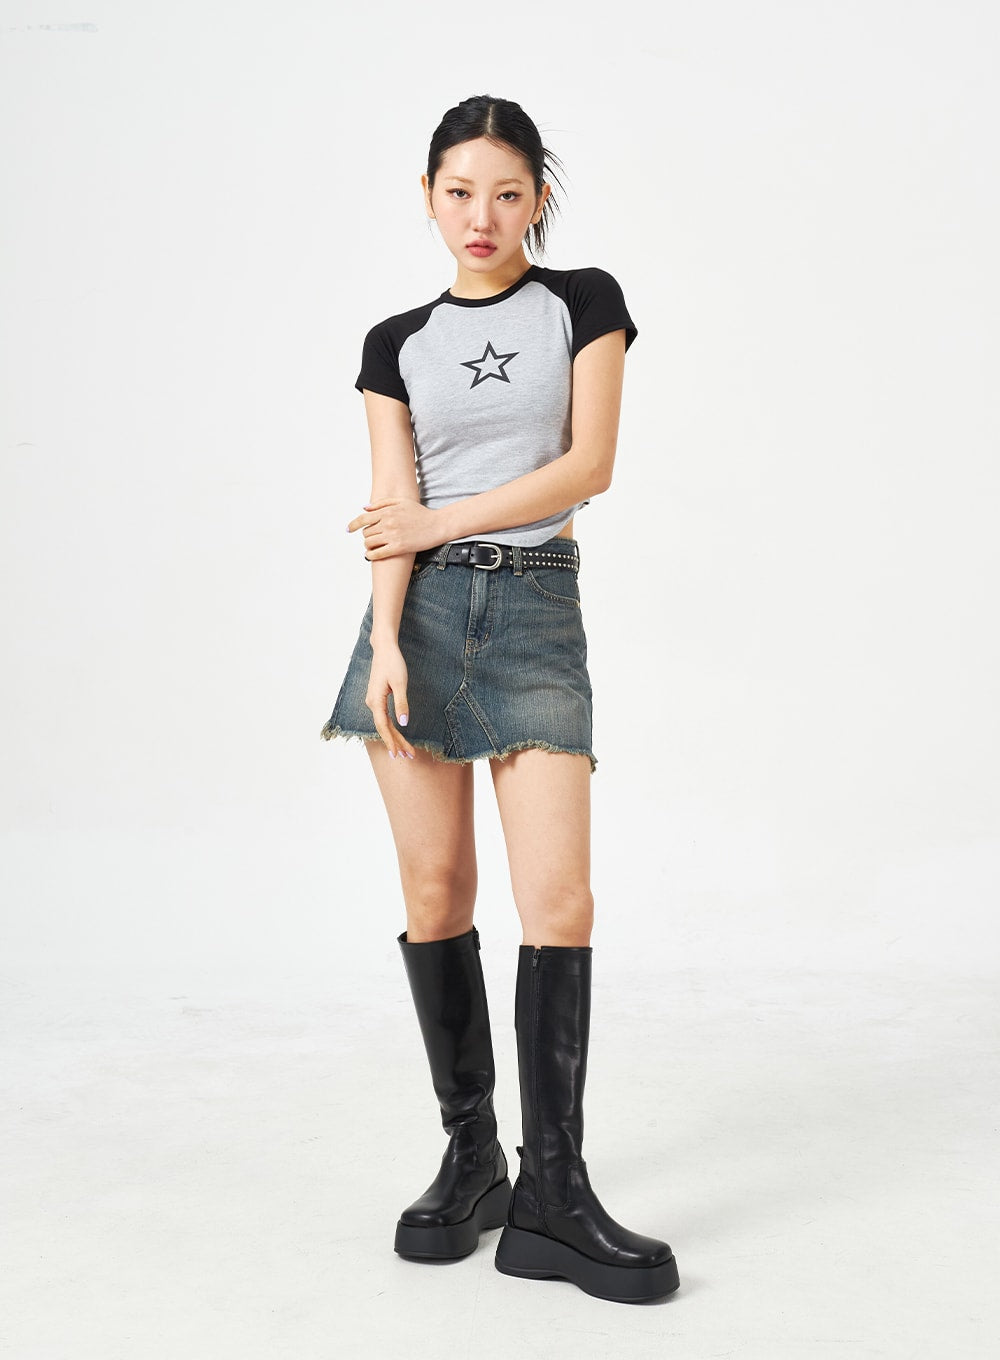 Star Two Color Tee CM321